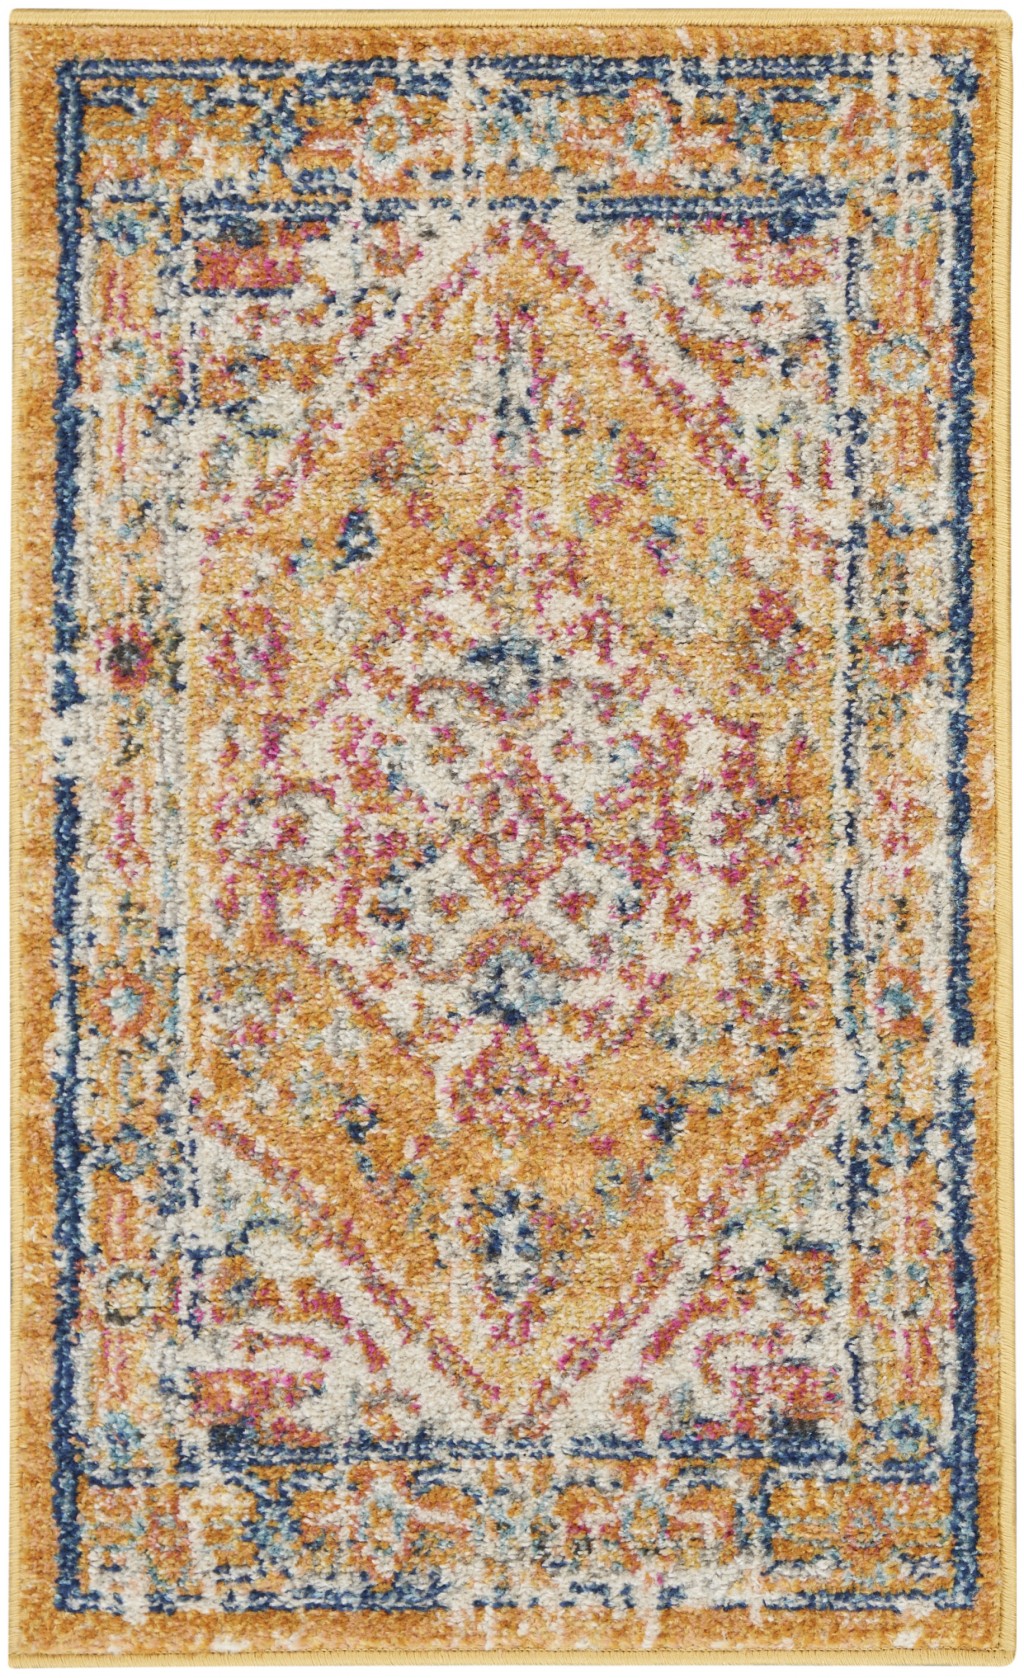 2' X 3' Yellow And Ivory Dhurrie Area Rug-385559-1